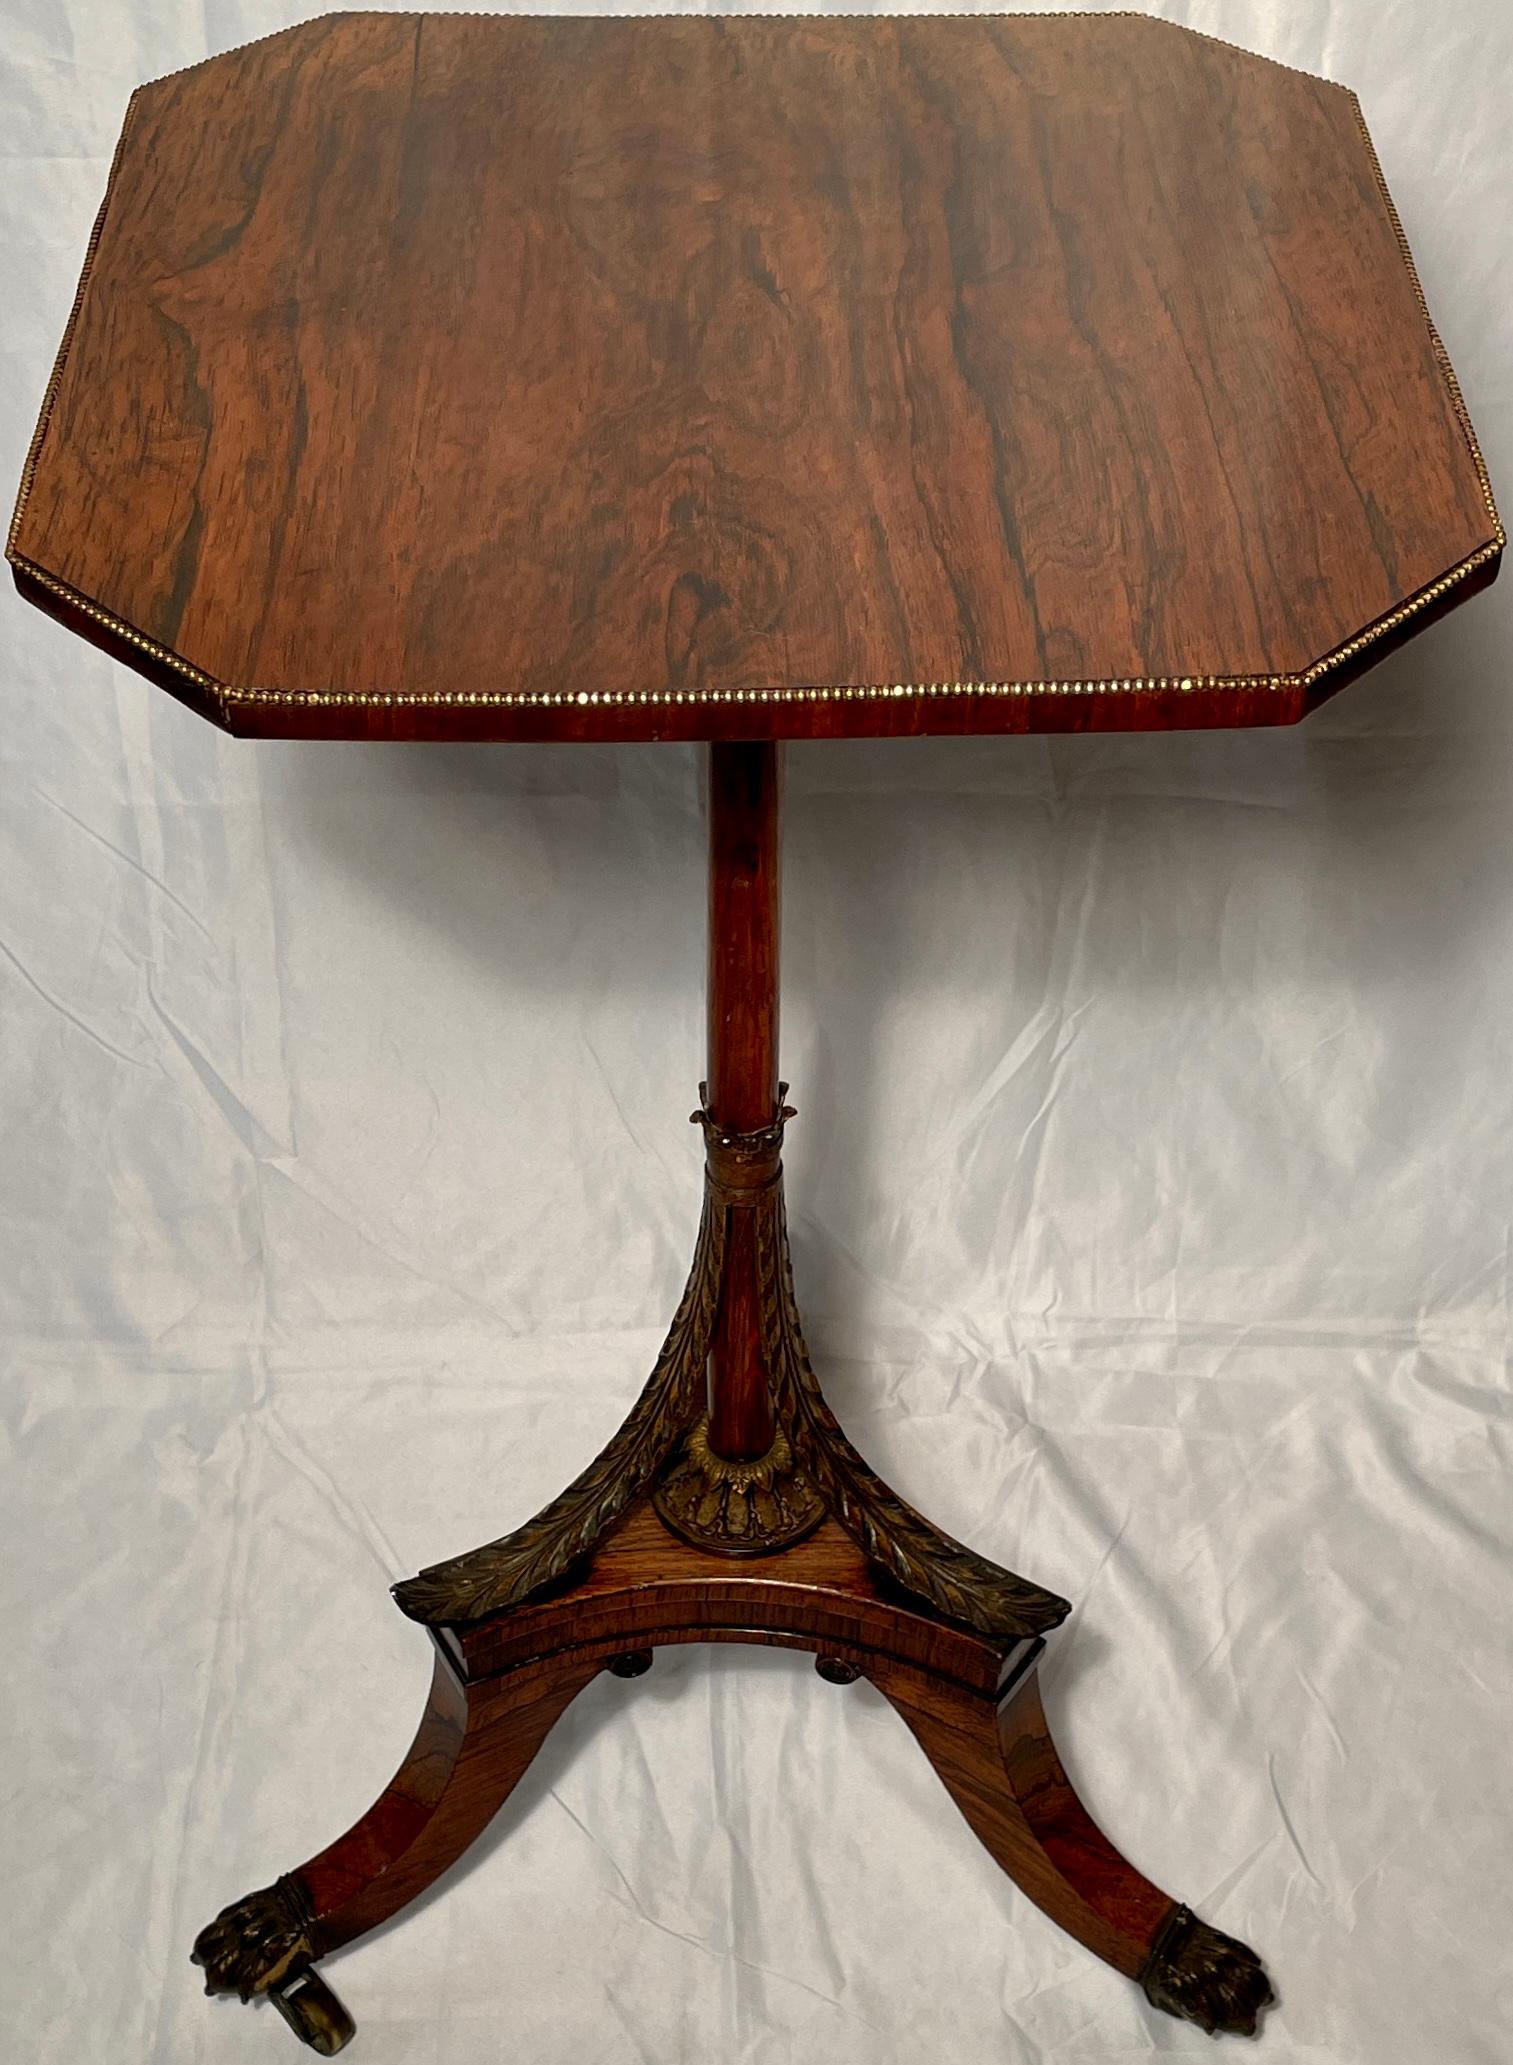 Antique English gold bronze mounted rosewood occasional table, Circa 1880.